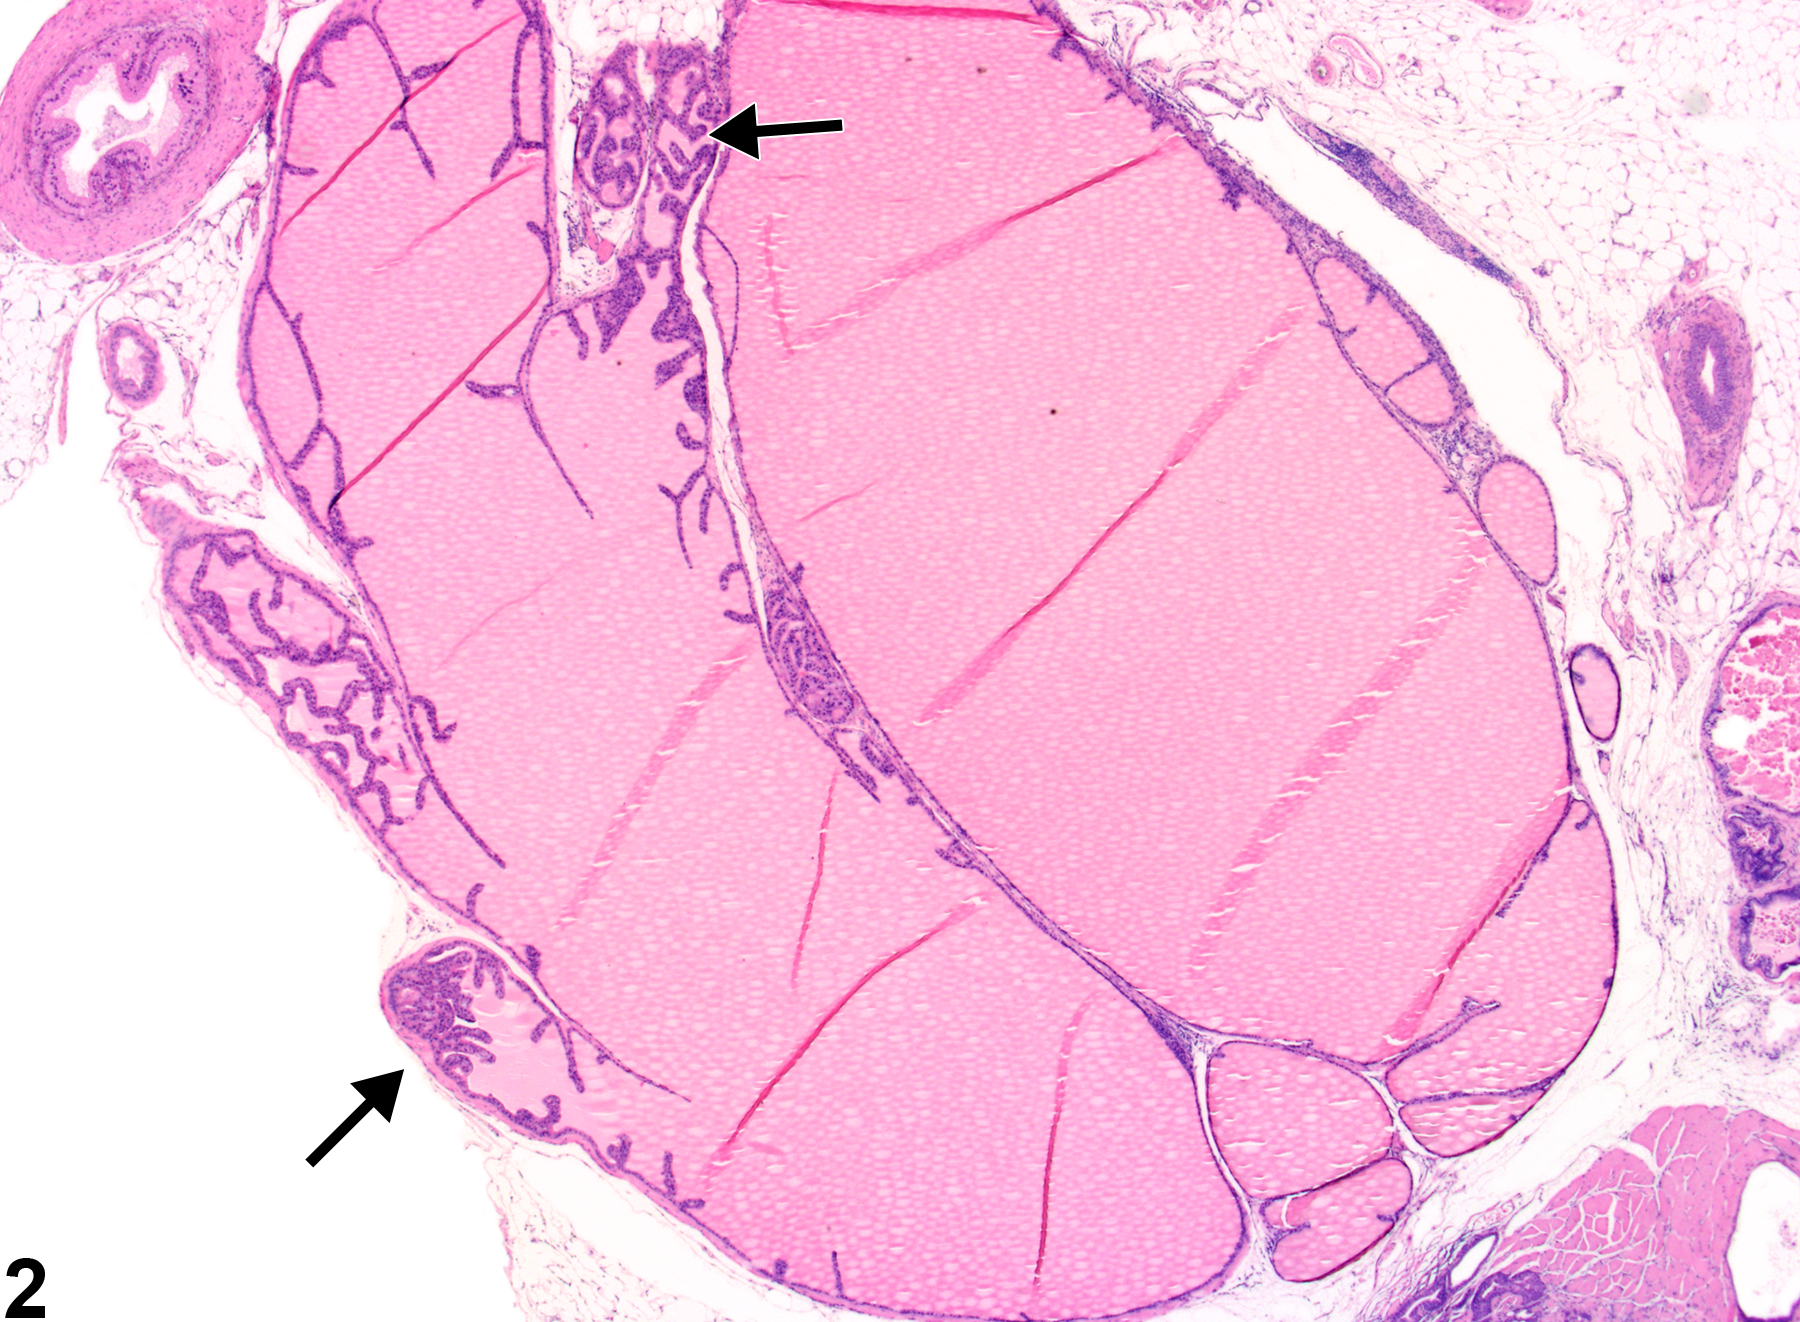 Image of dilation, acinar in the coagulating gland from a male B6C3F1 mouse in a chronic study